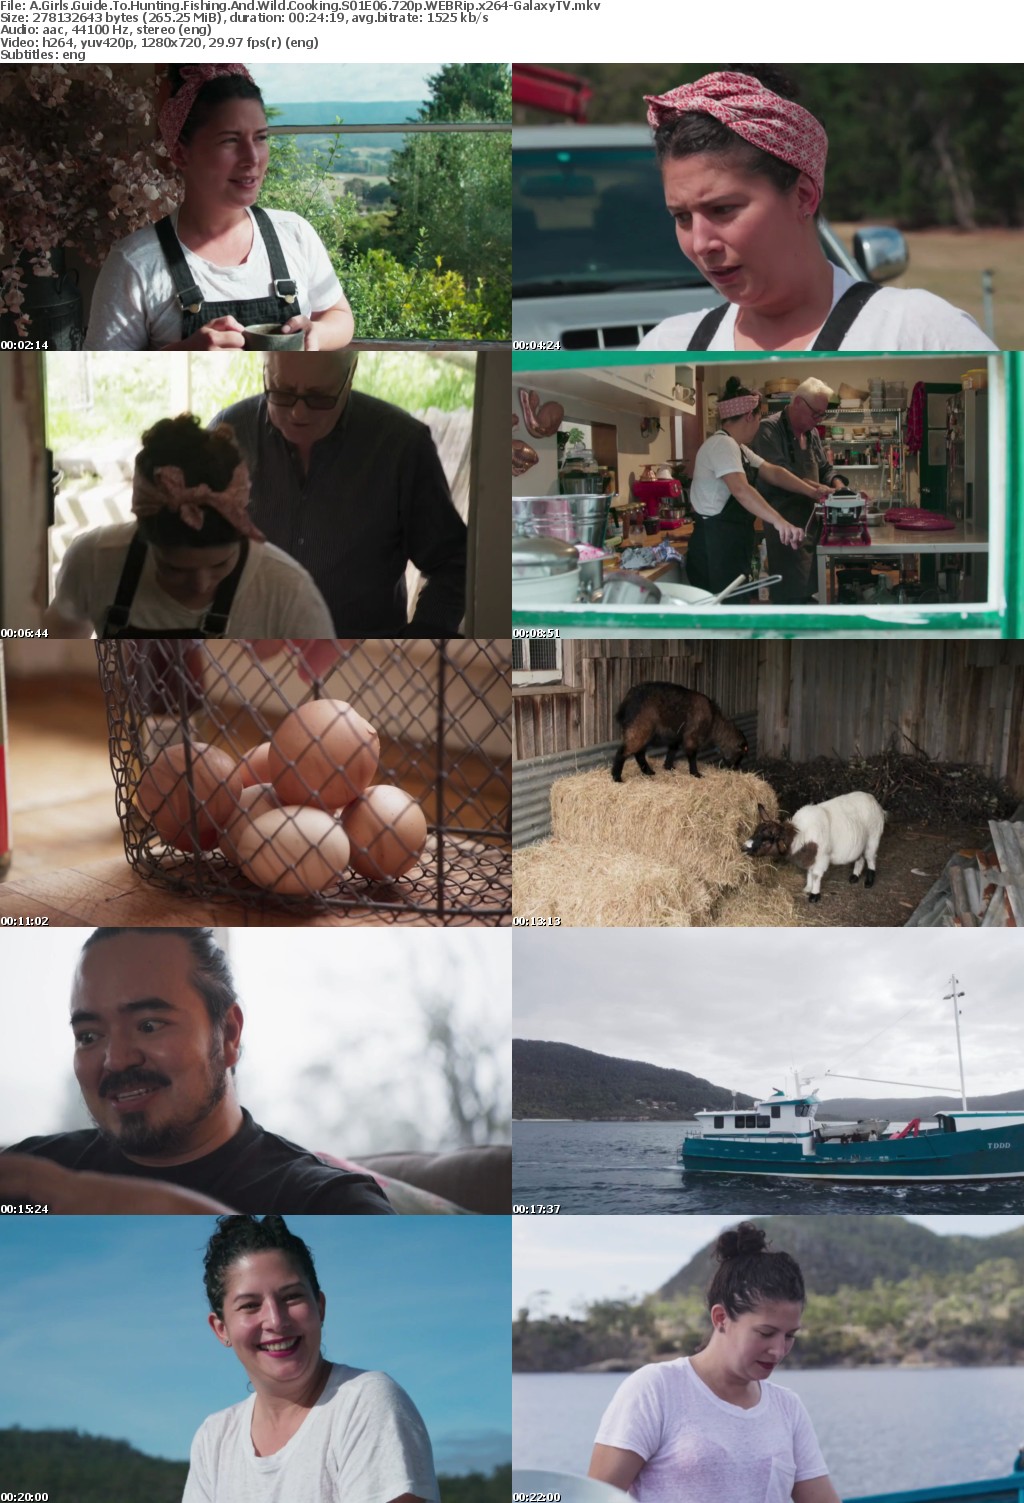 A Girls Guide To Hunting Fishing And Wild Cooking S01 COMPLETE 720p WEBRip x264-GalaxyTV